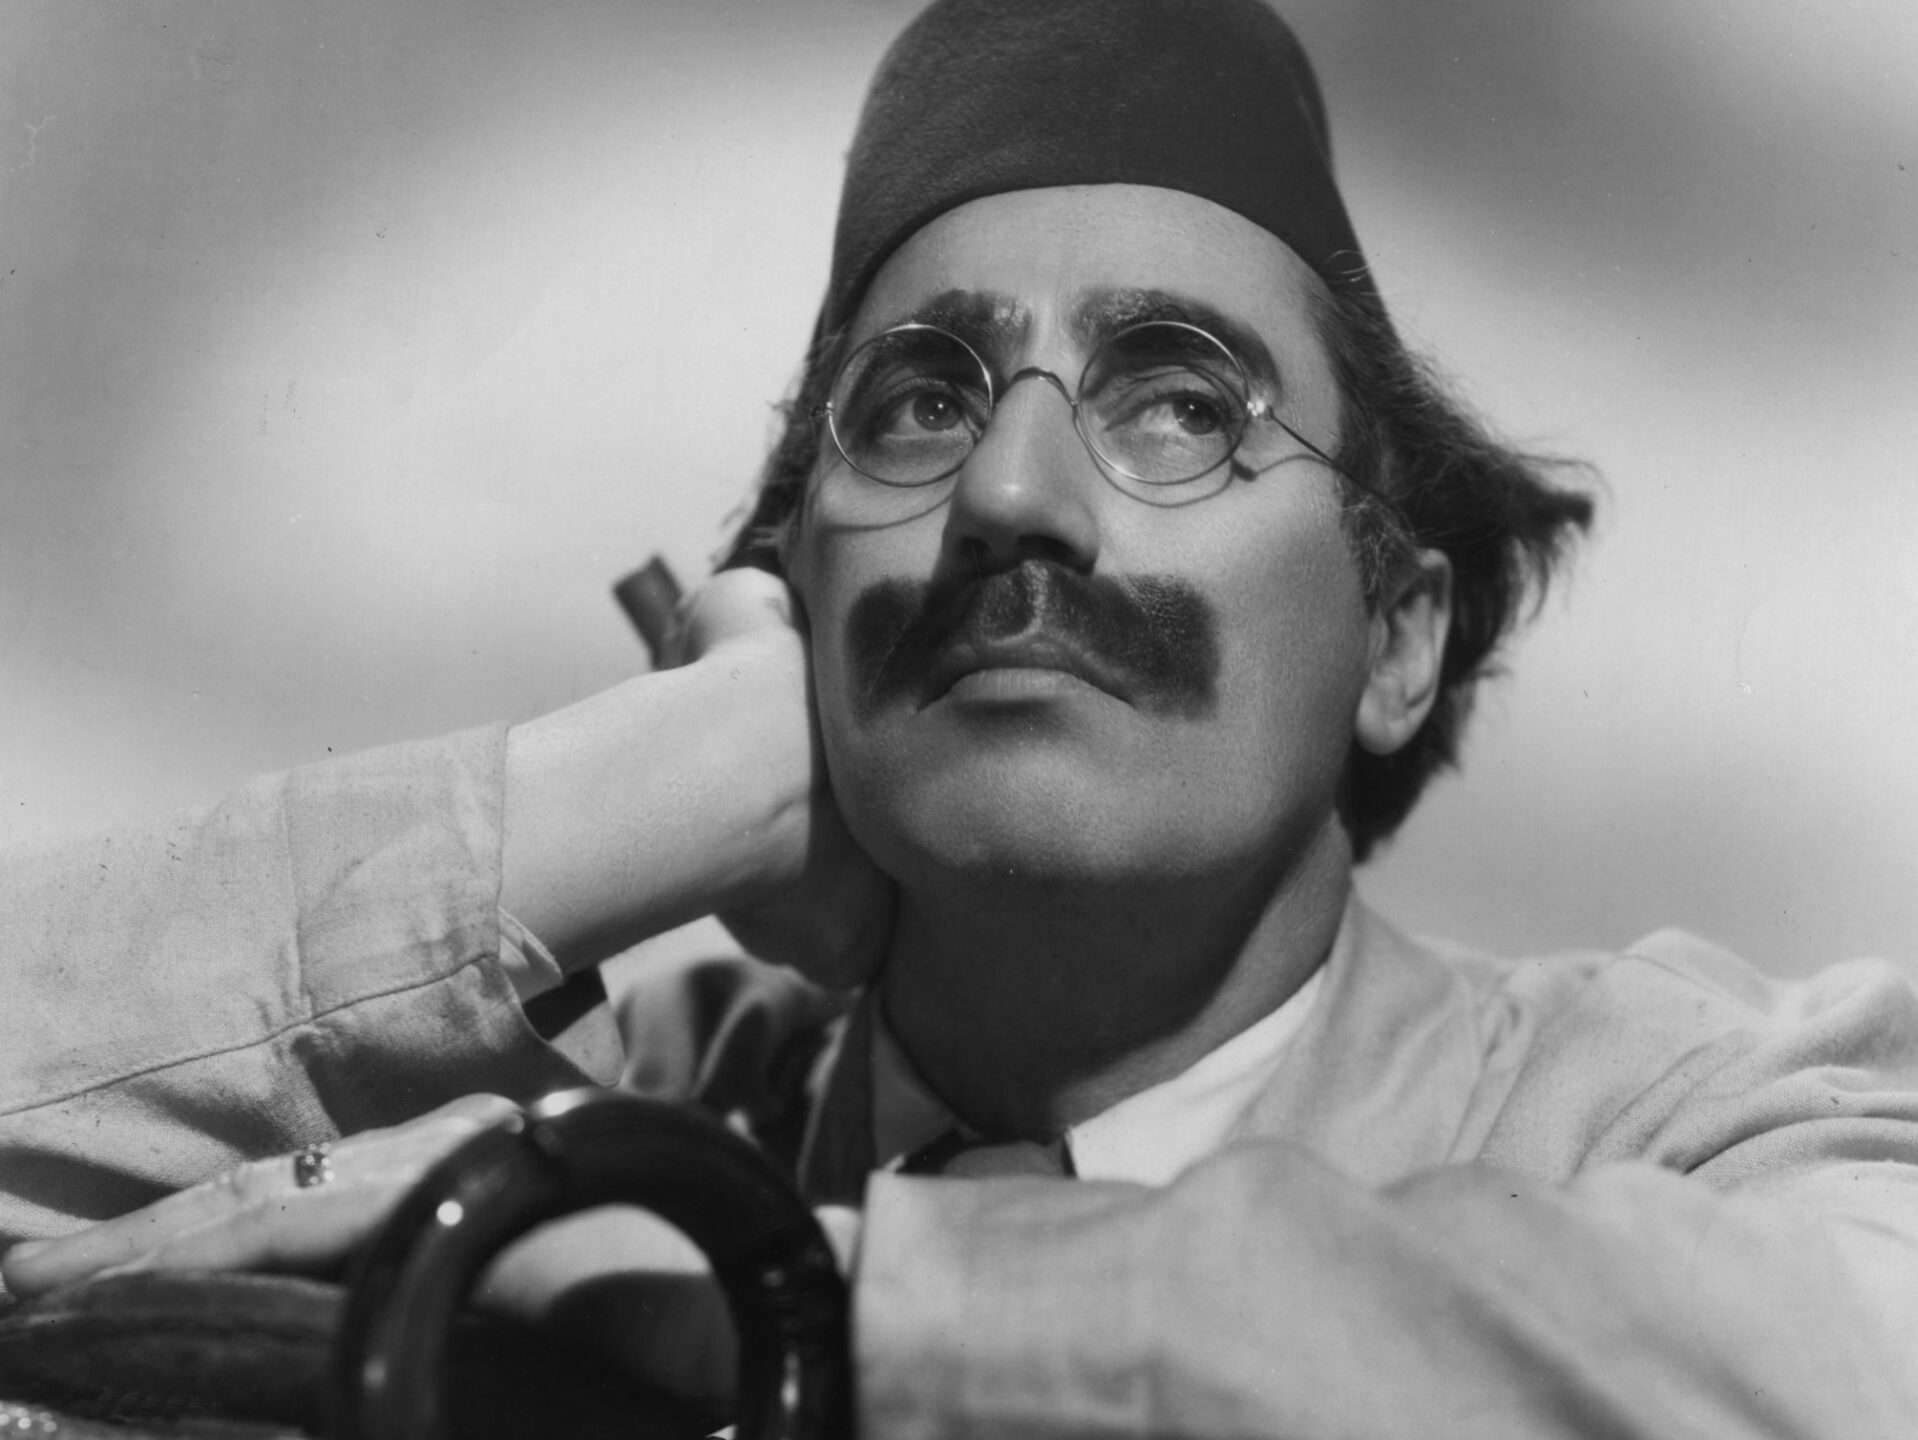 The former residence of Groucho Marx is going up for sale in Great Neck, New York, with an asking price of $2.3 million